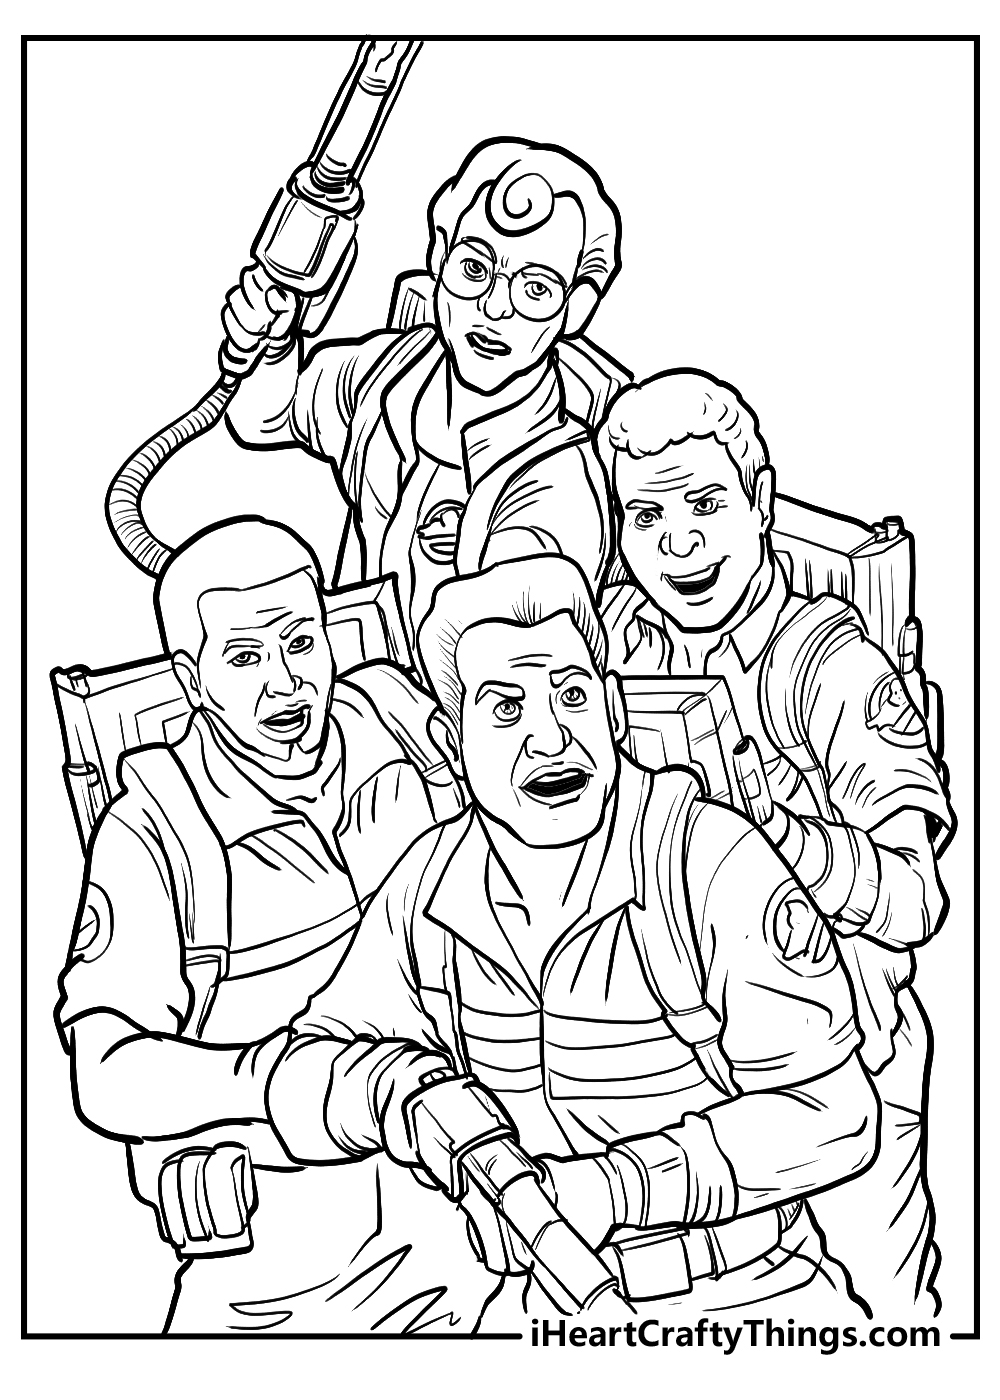 Printable ghostbusters coloring pages updated